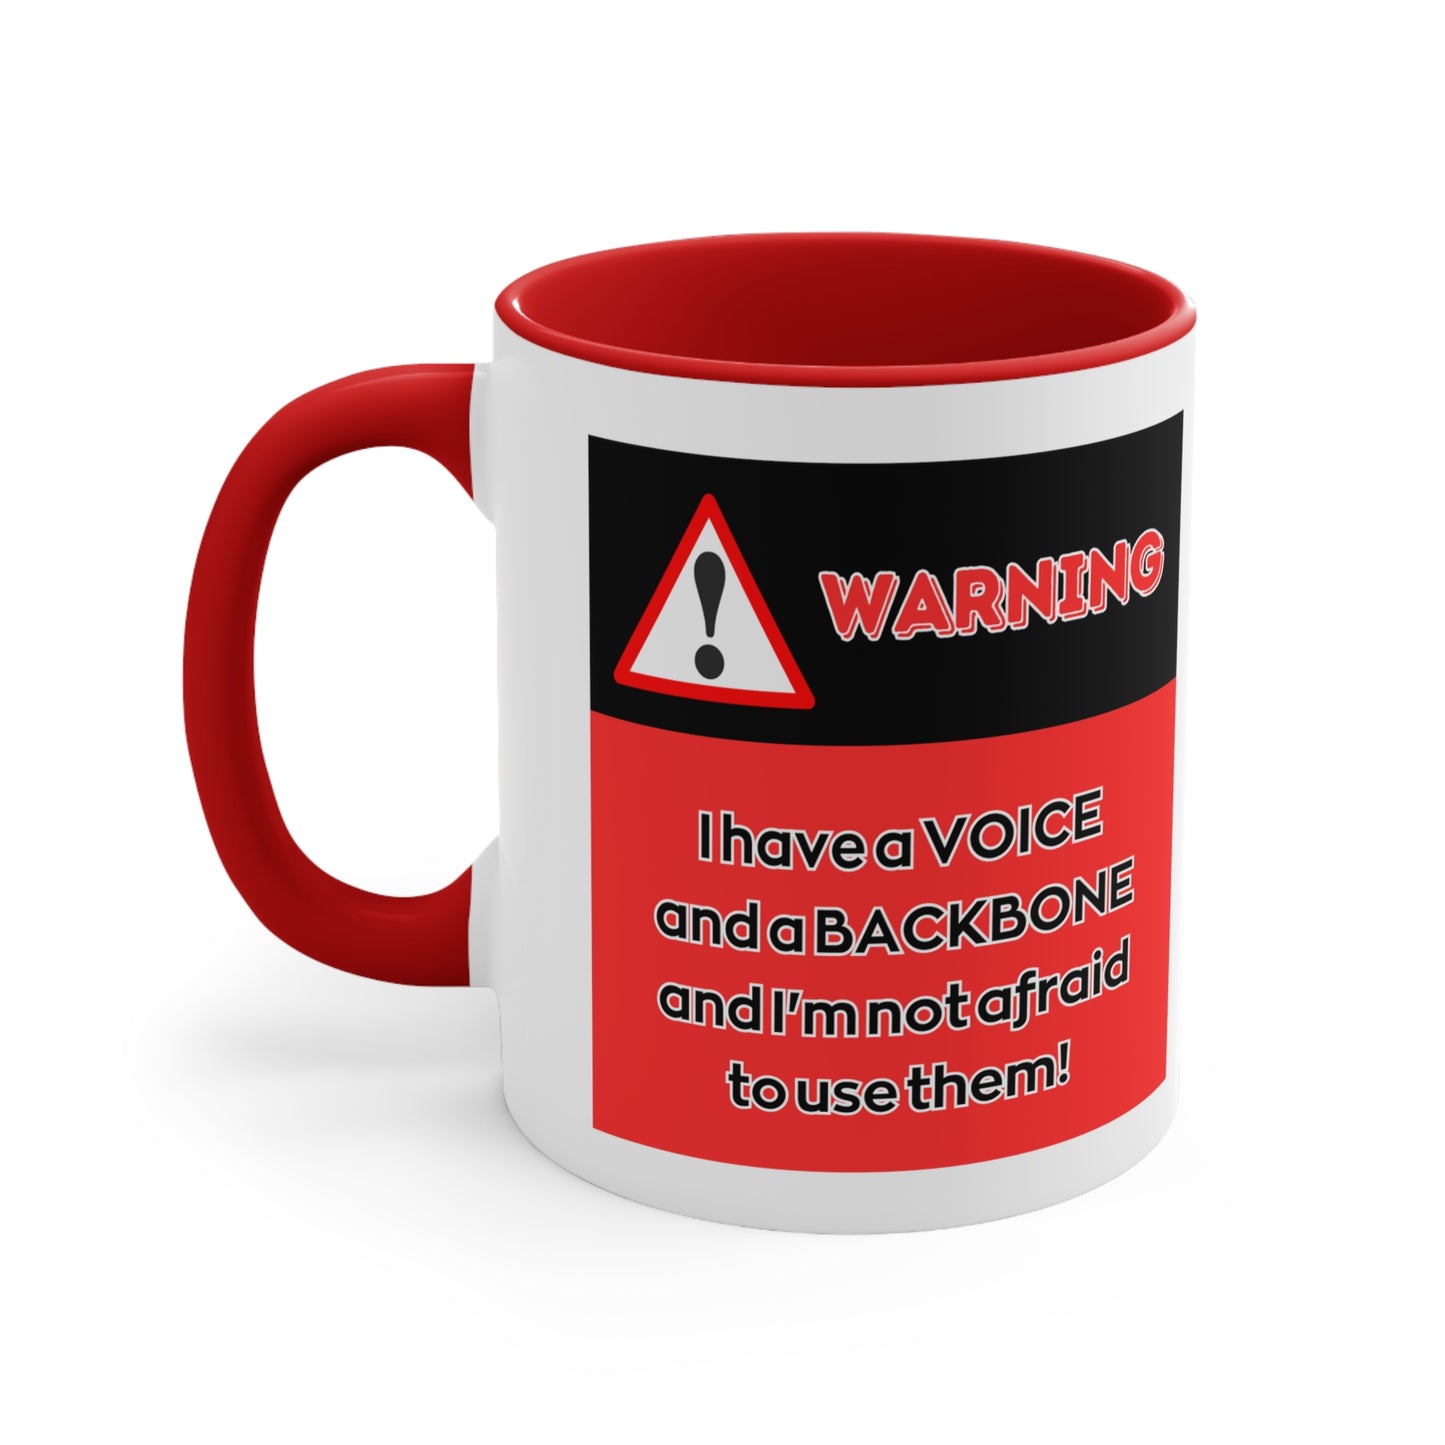 Warning! I have a voice and a Backbone and I'm NOT afraid to use them! - Accent Coffee Mug, 11oz